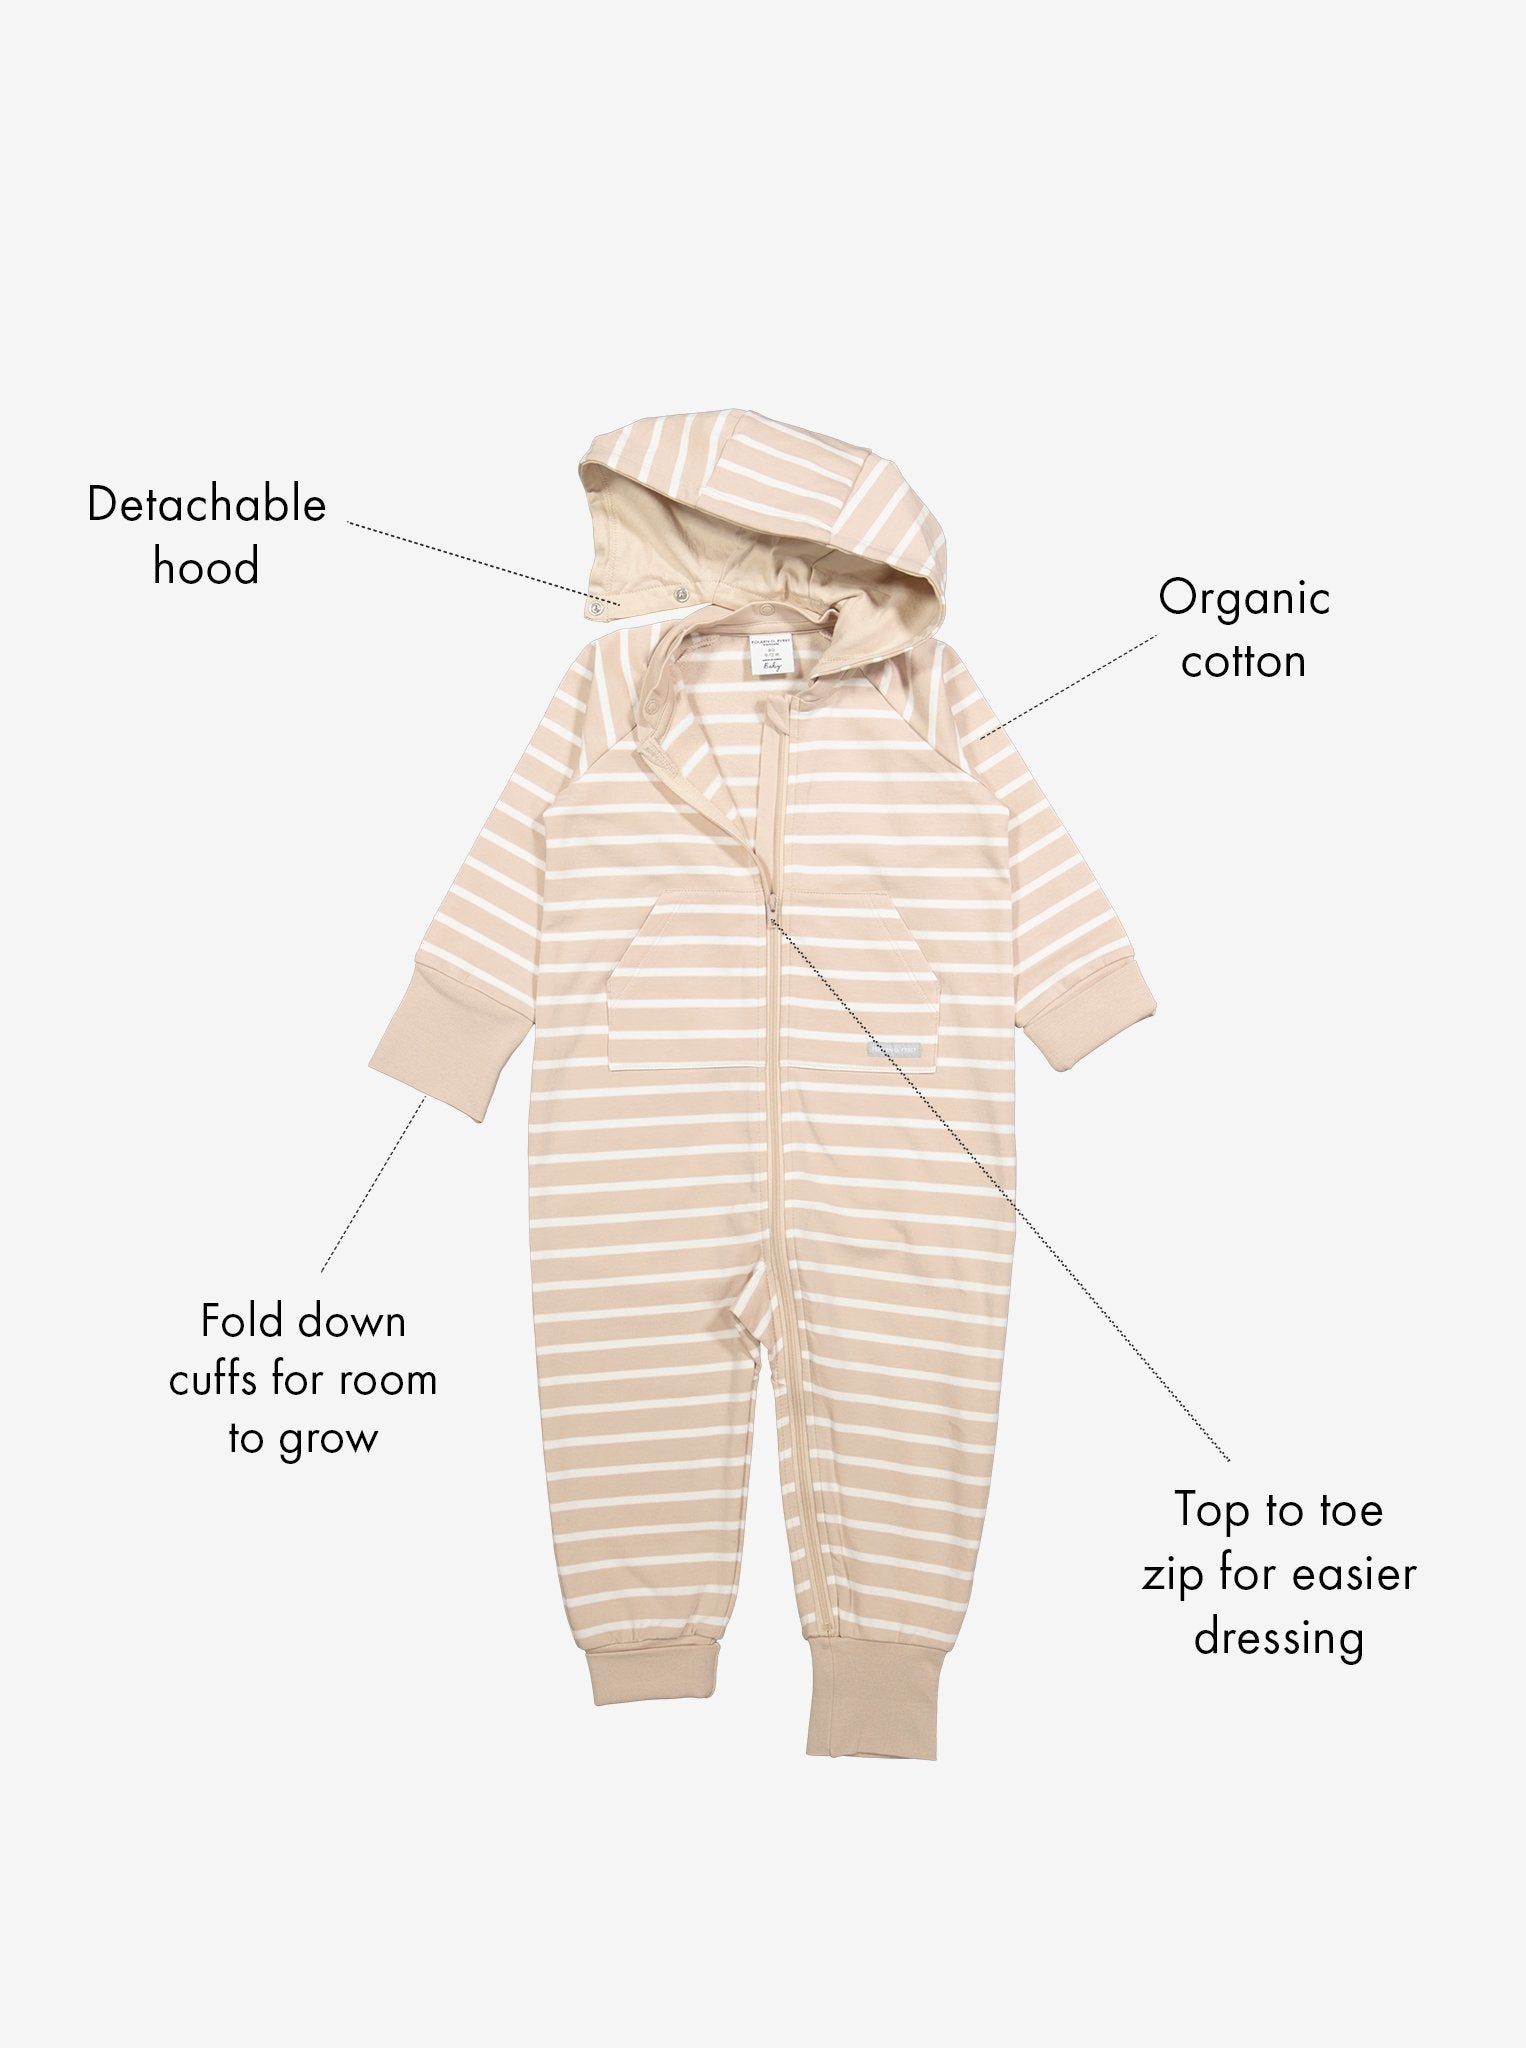  Organic Striped Beige Babygrow from Polarn O. Pyret Kidswear. Made from eco-friendly materials.